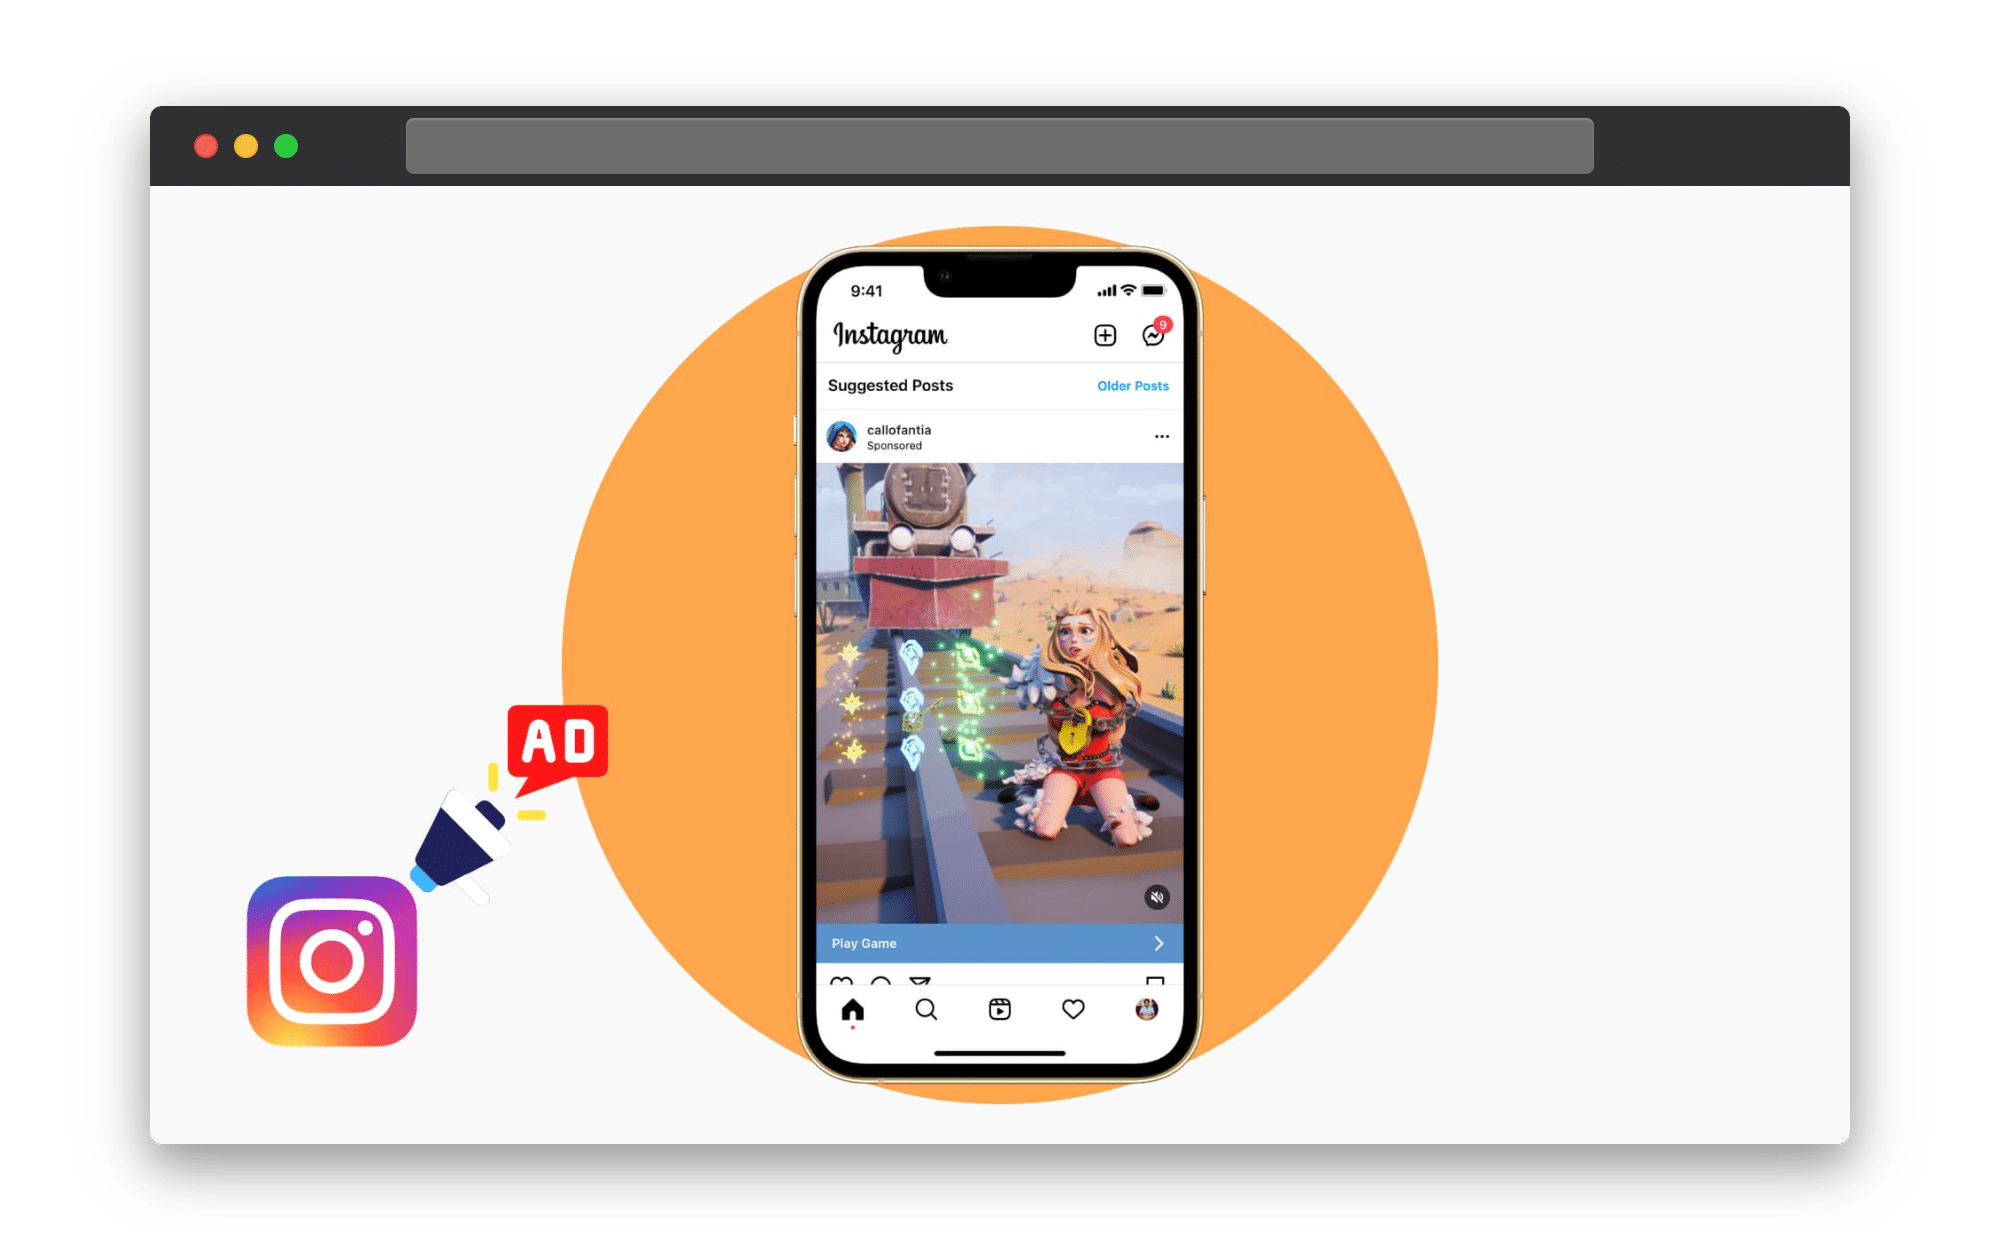 An example of what a typical AD will look like in Instagram.